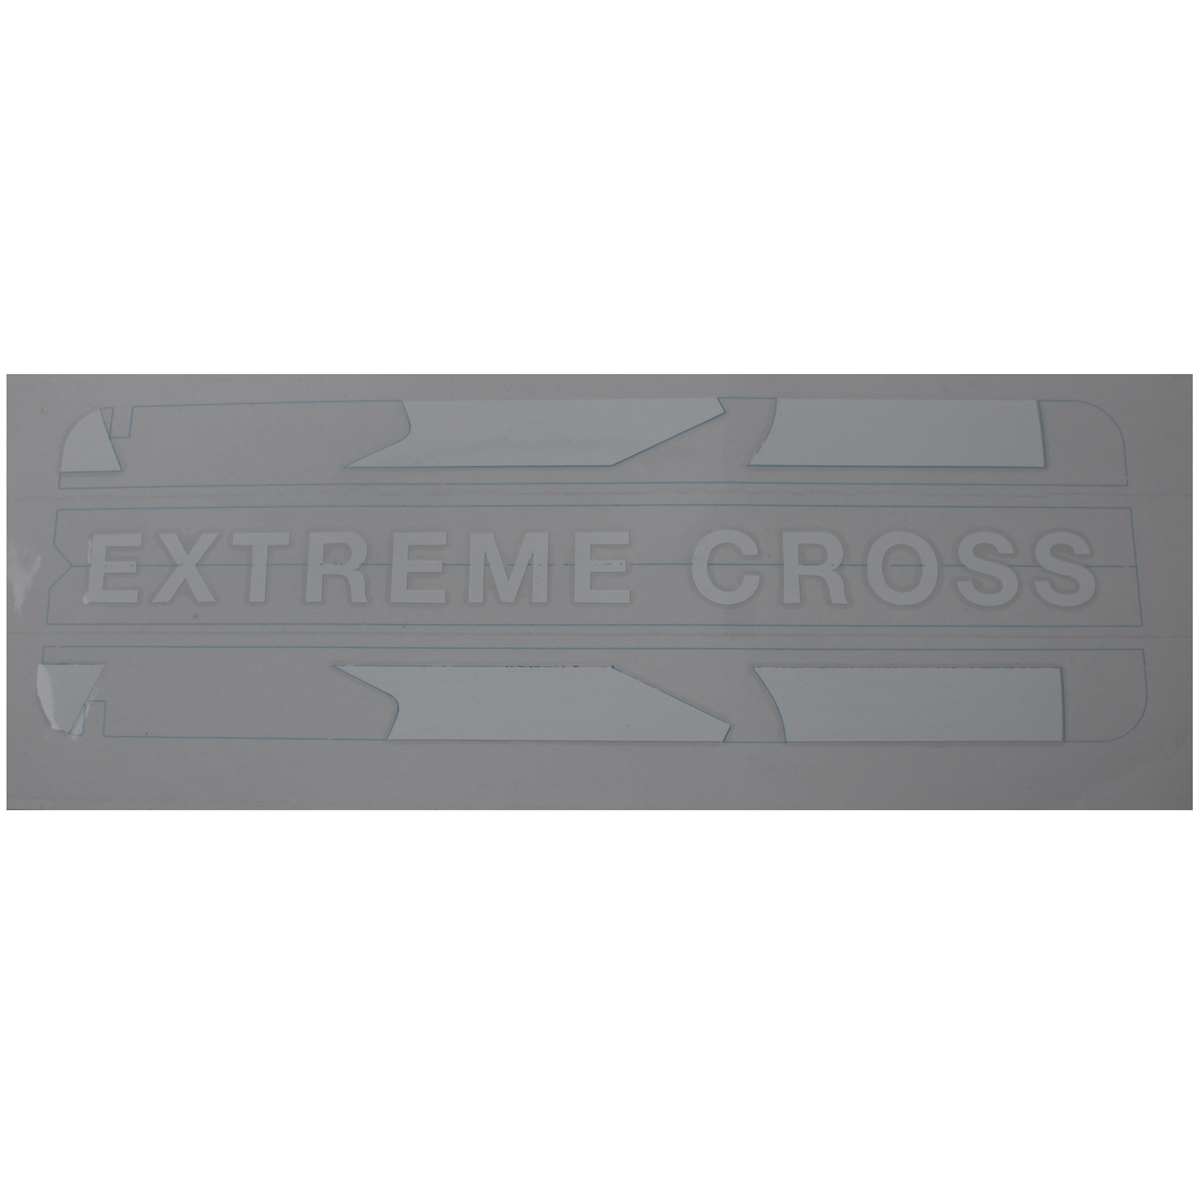 Battery cover sticker Extreme Cross white